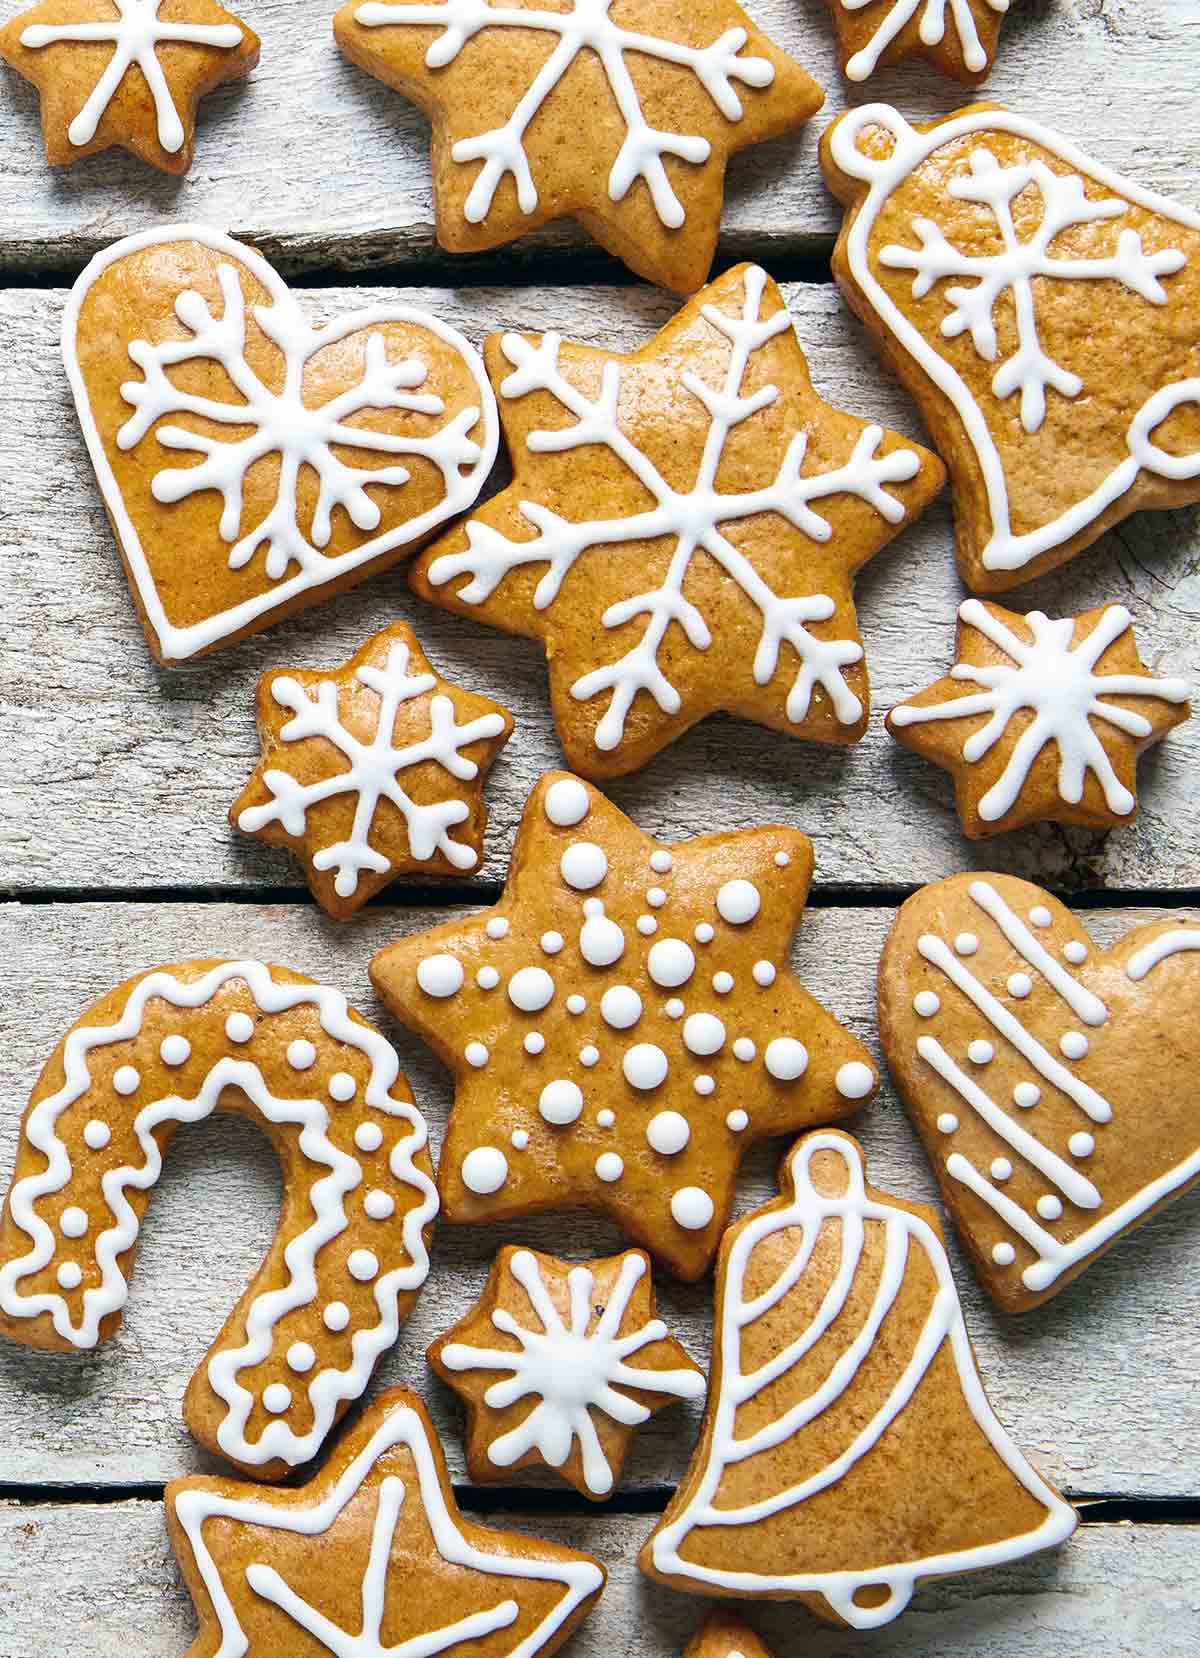 A variety of gingersnaps cookies cut into different shapes